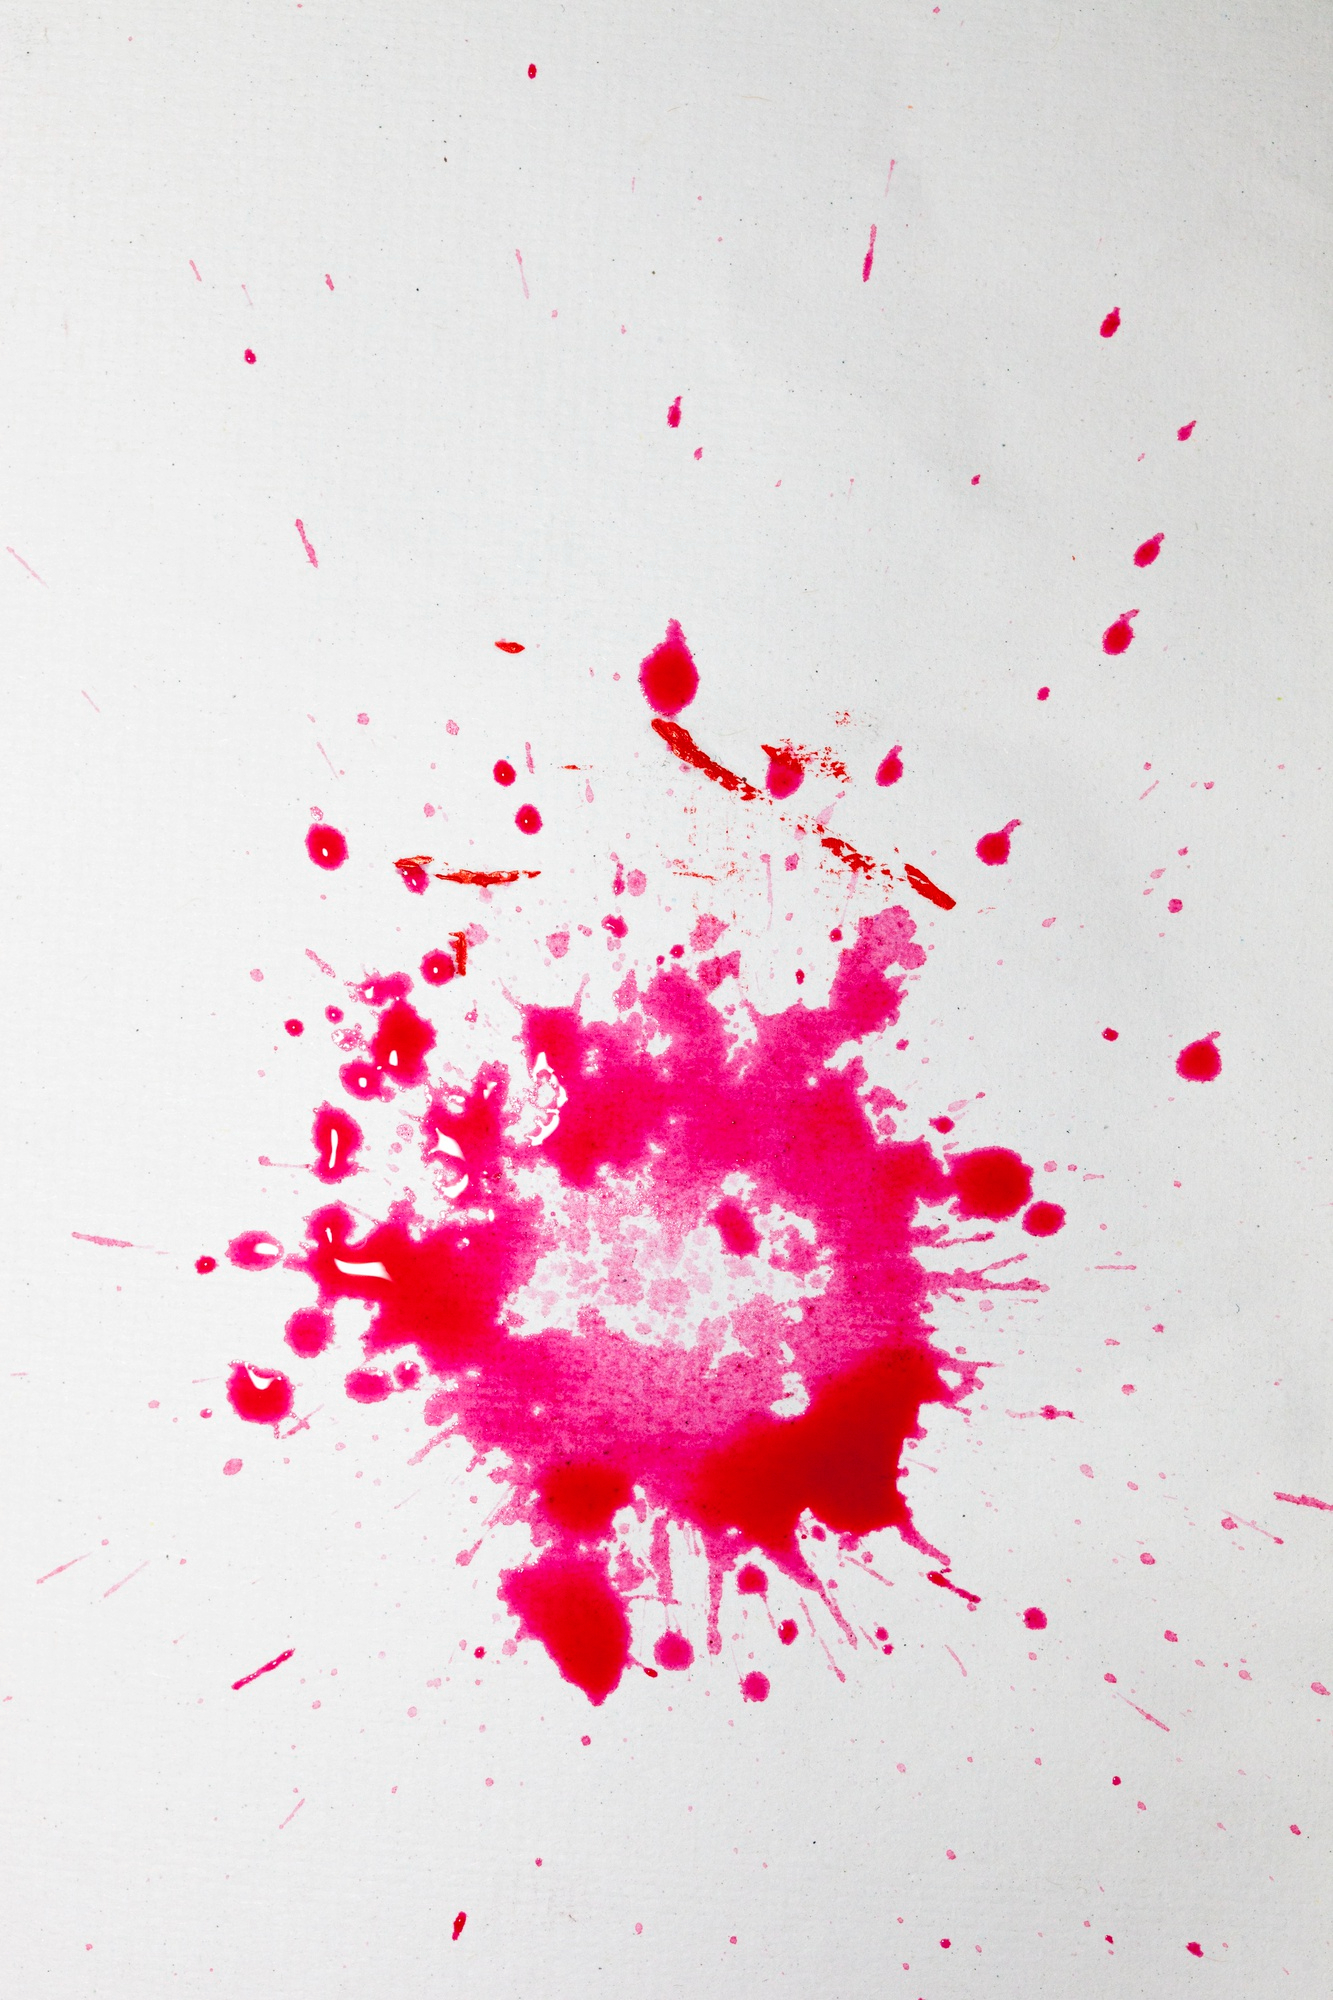 A splatter of red paint on white background | Source: Pexels